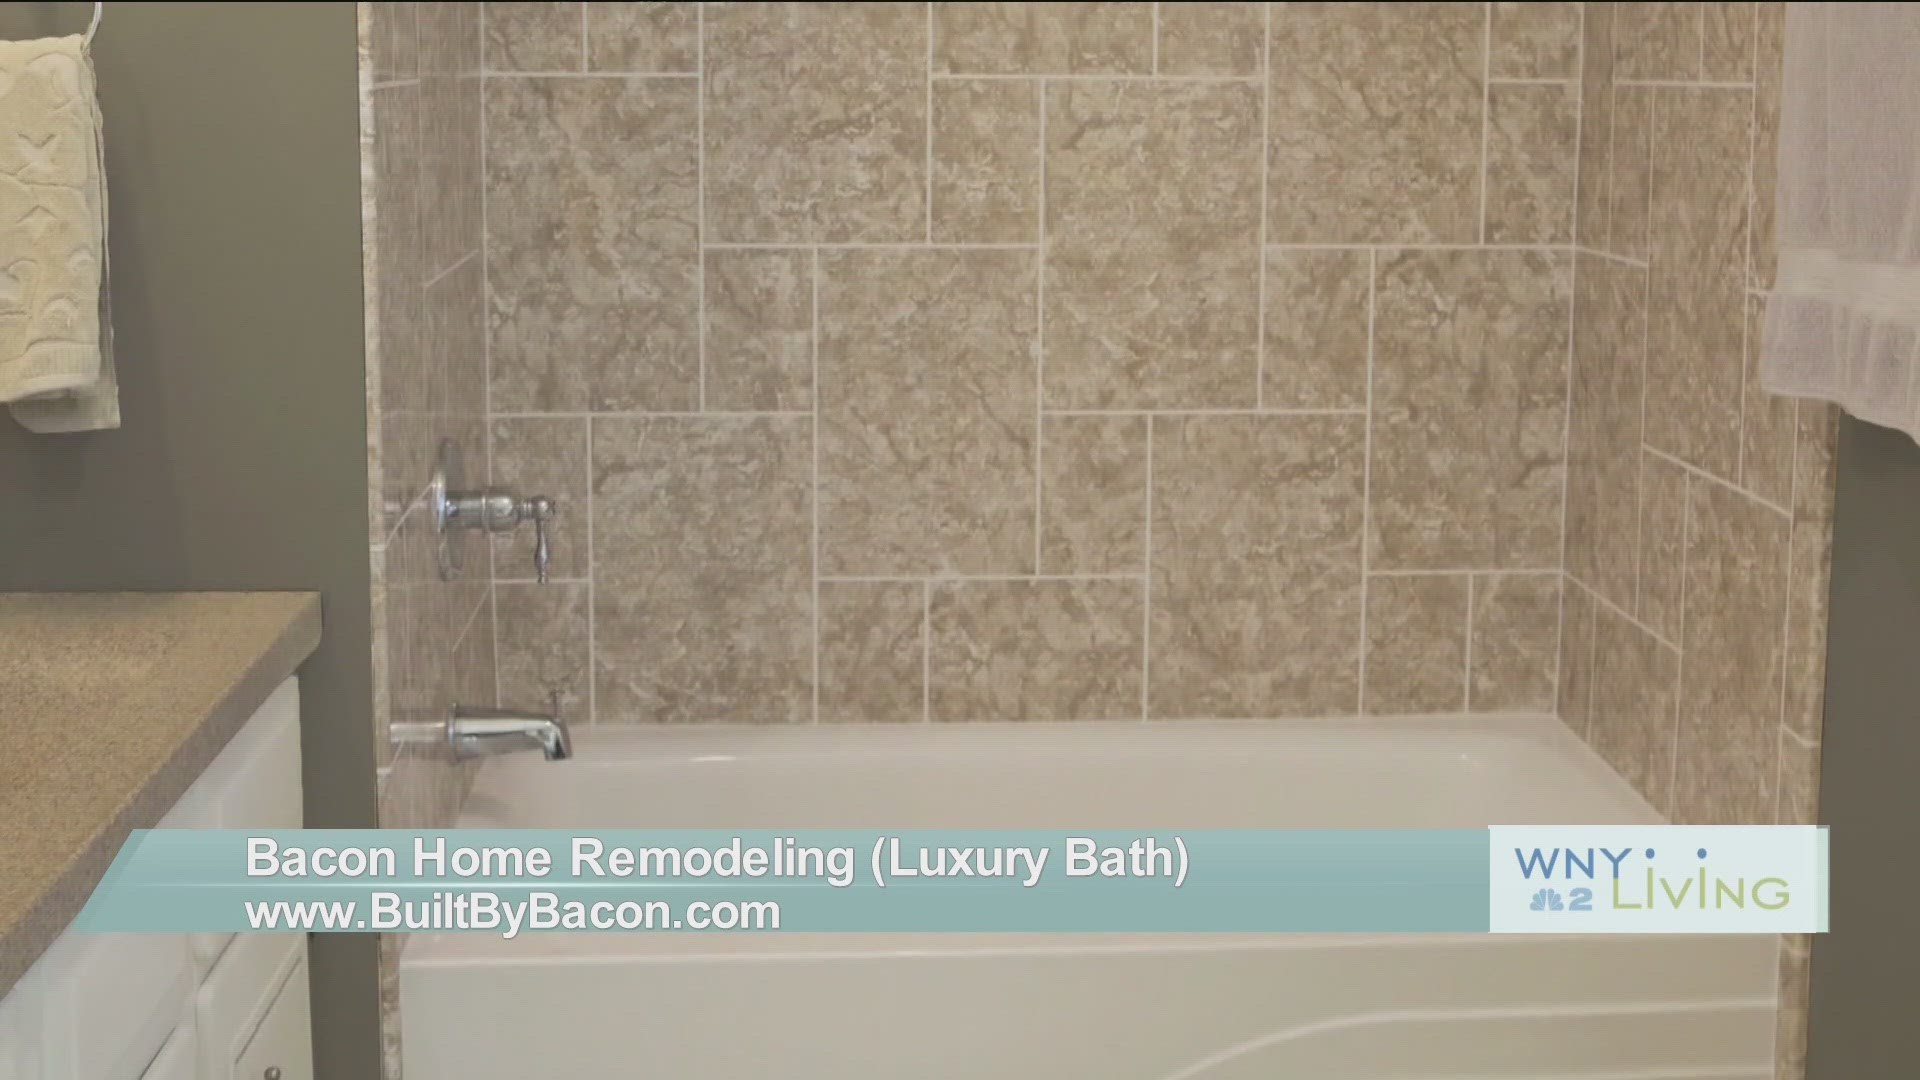 April 6th WNY Living - Bacon Home Remodeling (THIS VIDEO IS SPONSORED BY BACON HOME REMODELING)